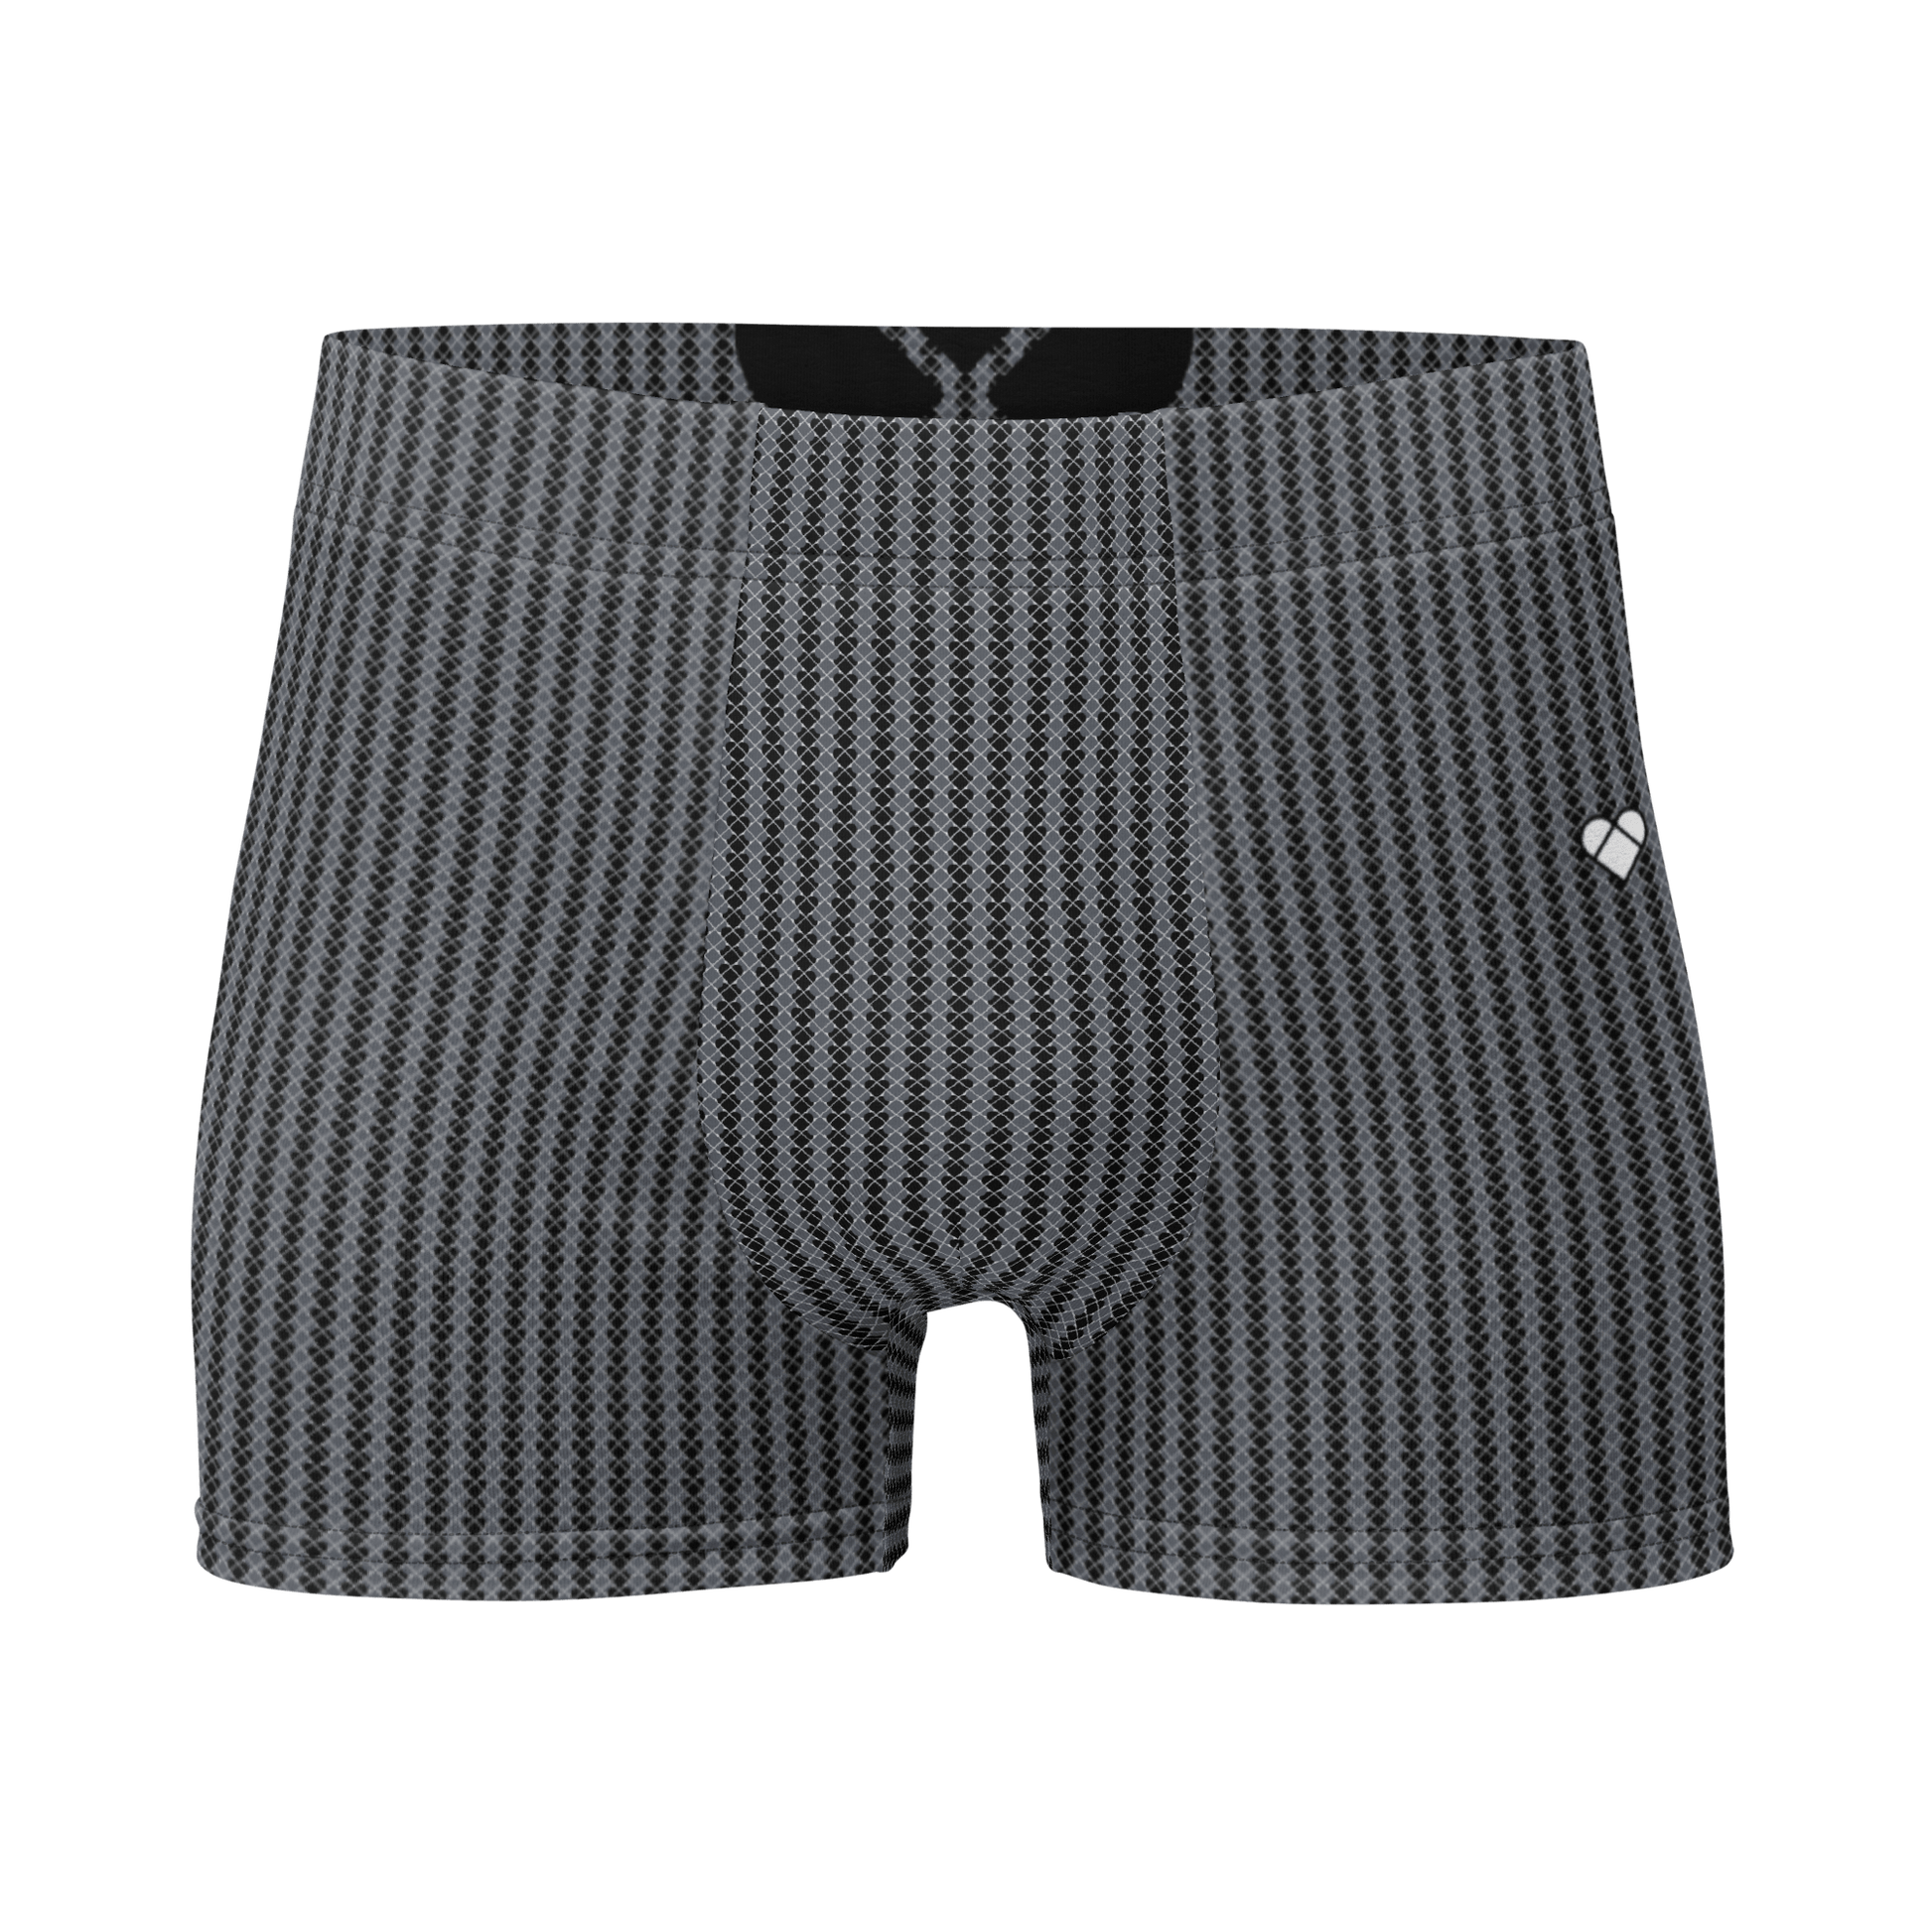 CRiZ AMOR Lovogram Boxers - A charming statement piece for men, heart-patterned in two shades of gray